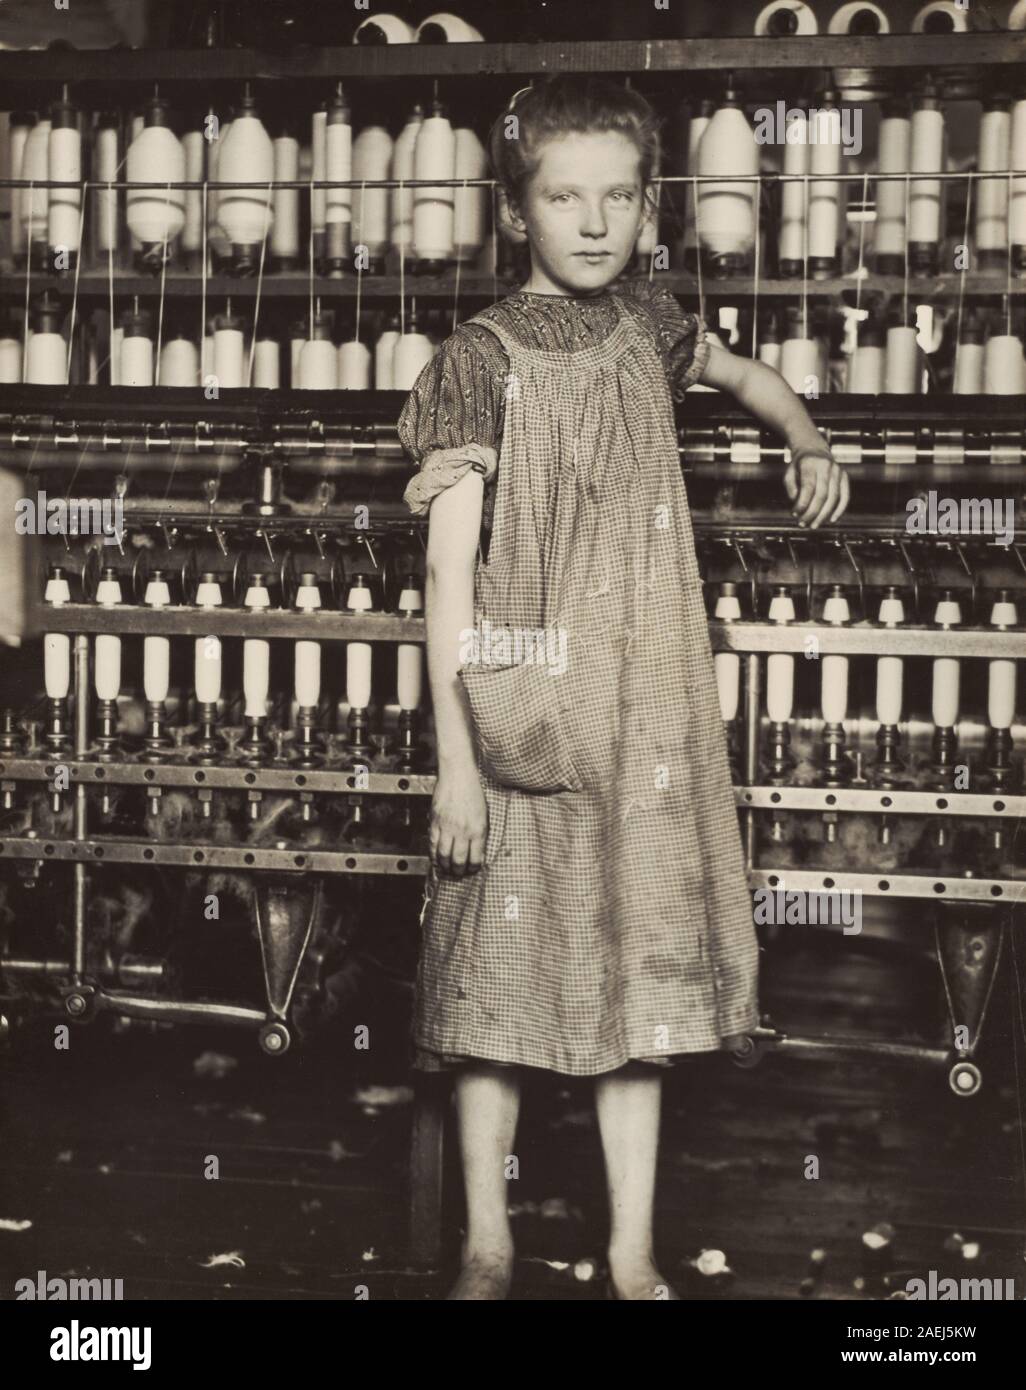 Lewis Hine, Addie Card, 12 years old Spinner in cotton mill, North Pownal, Vermont, 1910 Addie Card, 12 years old. Spinner in cotton mill, North Pownal, Vermont; 1910date Stock Photo